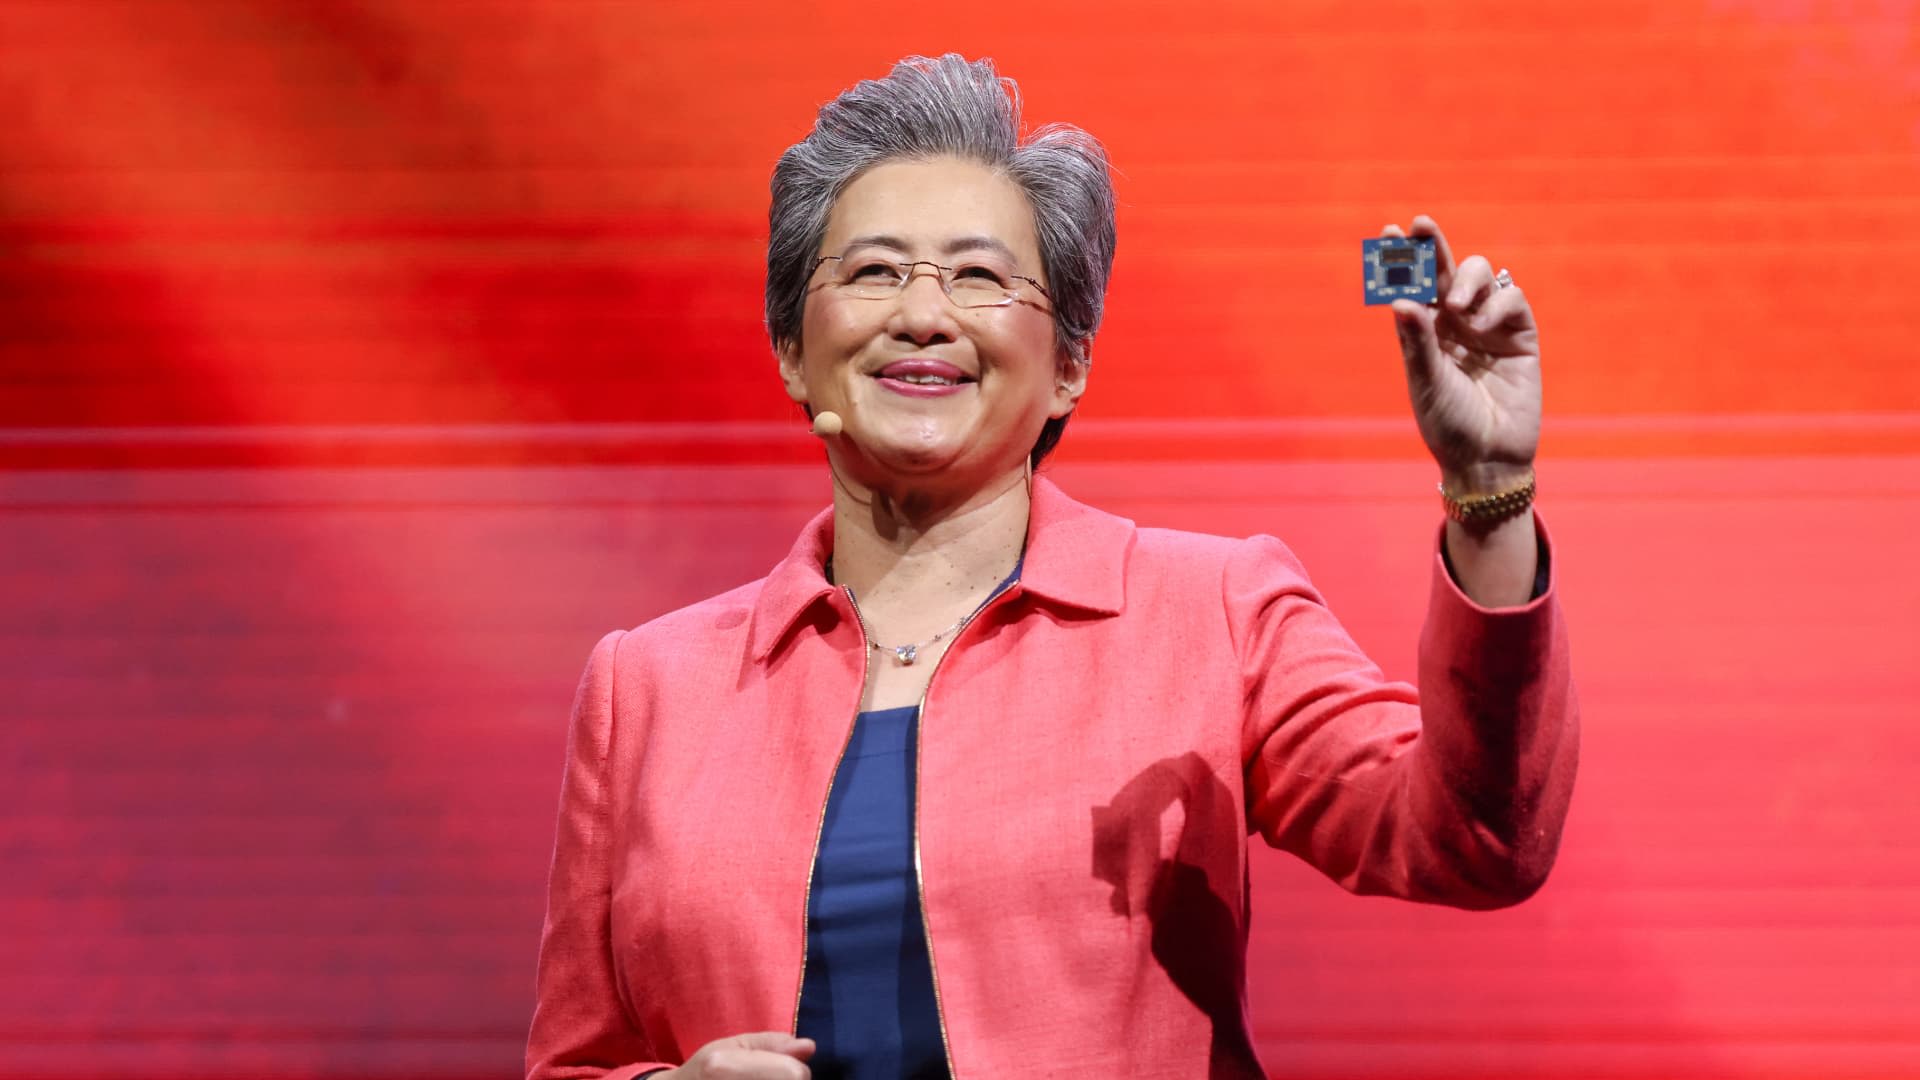 AMD jumps on earnings report that validates our decision to reinvest in the stock